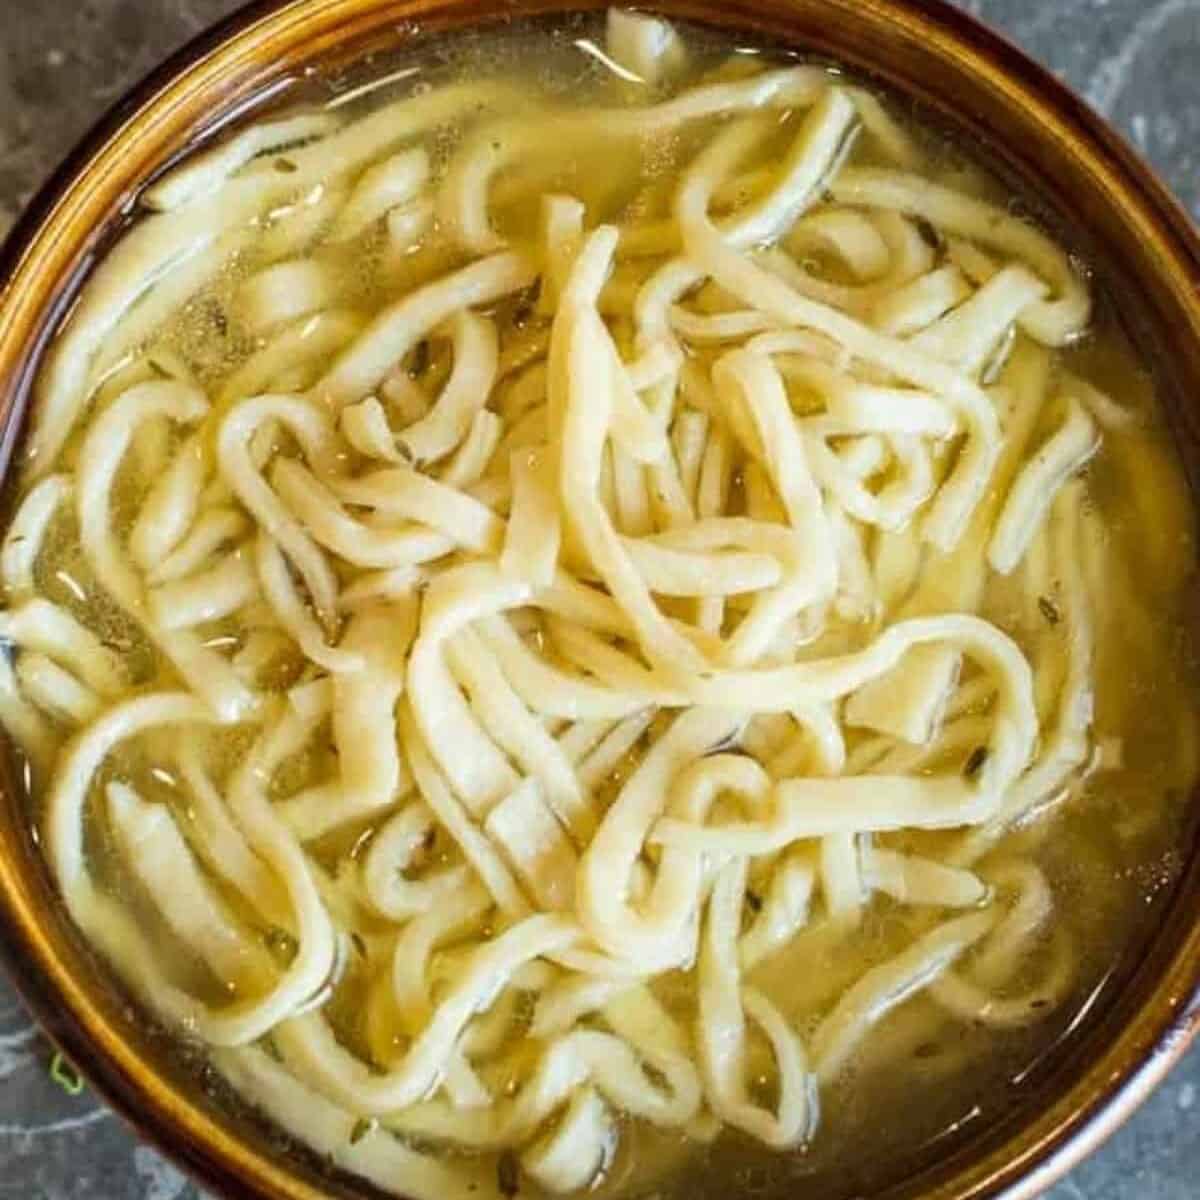 homemade dumpling noodles, from scratch, served in rich broth